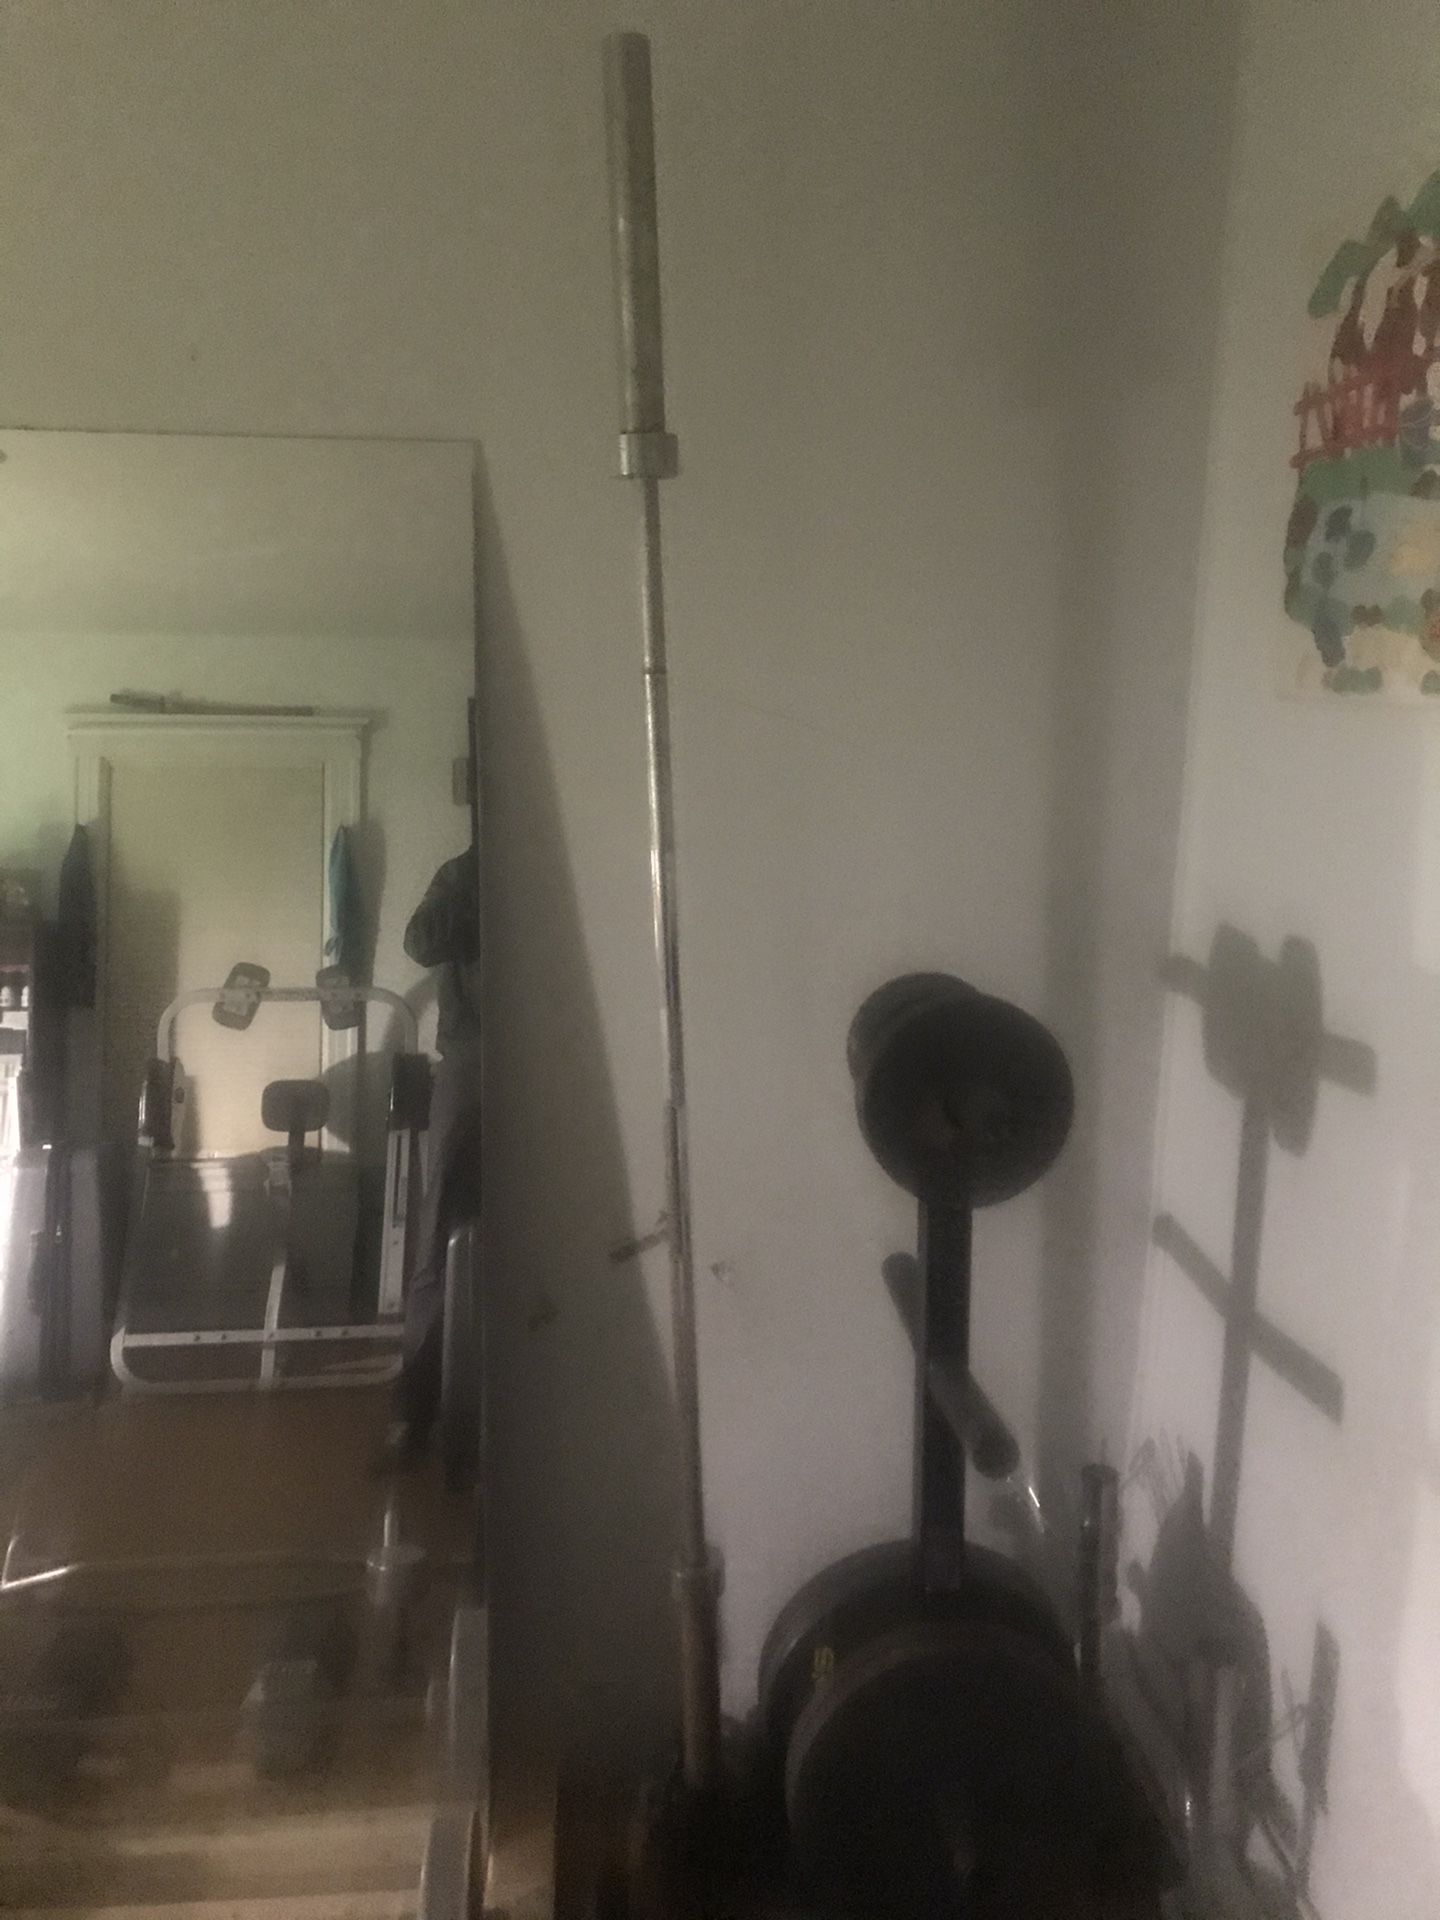 8’ Olympic weight lifting bar for squat. The knurling in the middle of the bar is there to keep the bar from slidding down your back. Asking $100 or